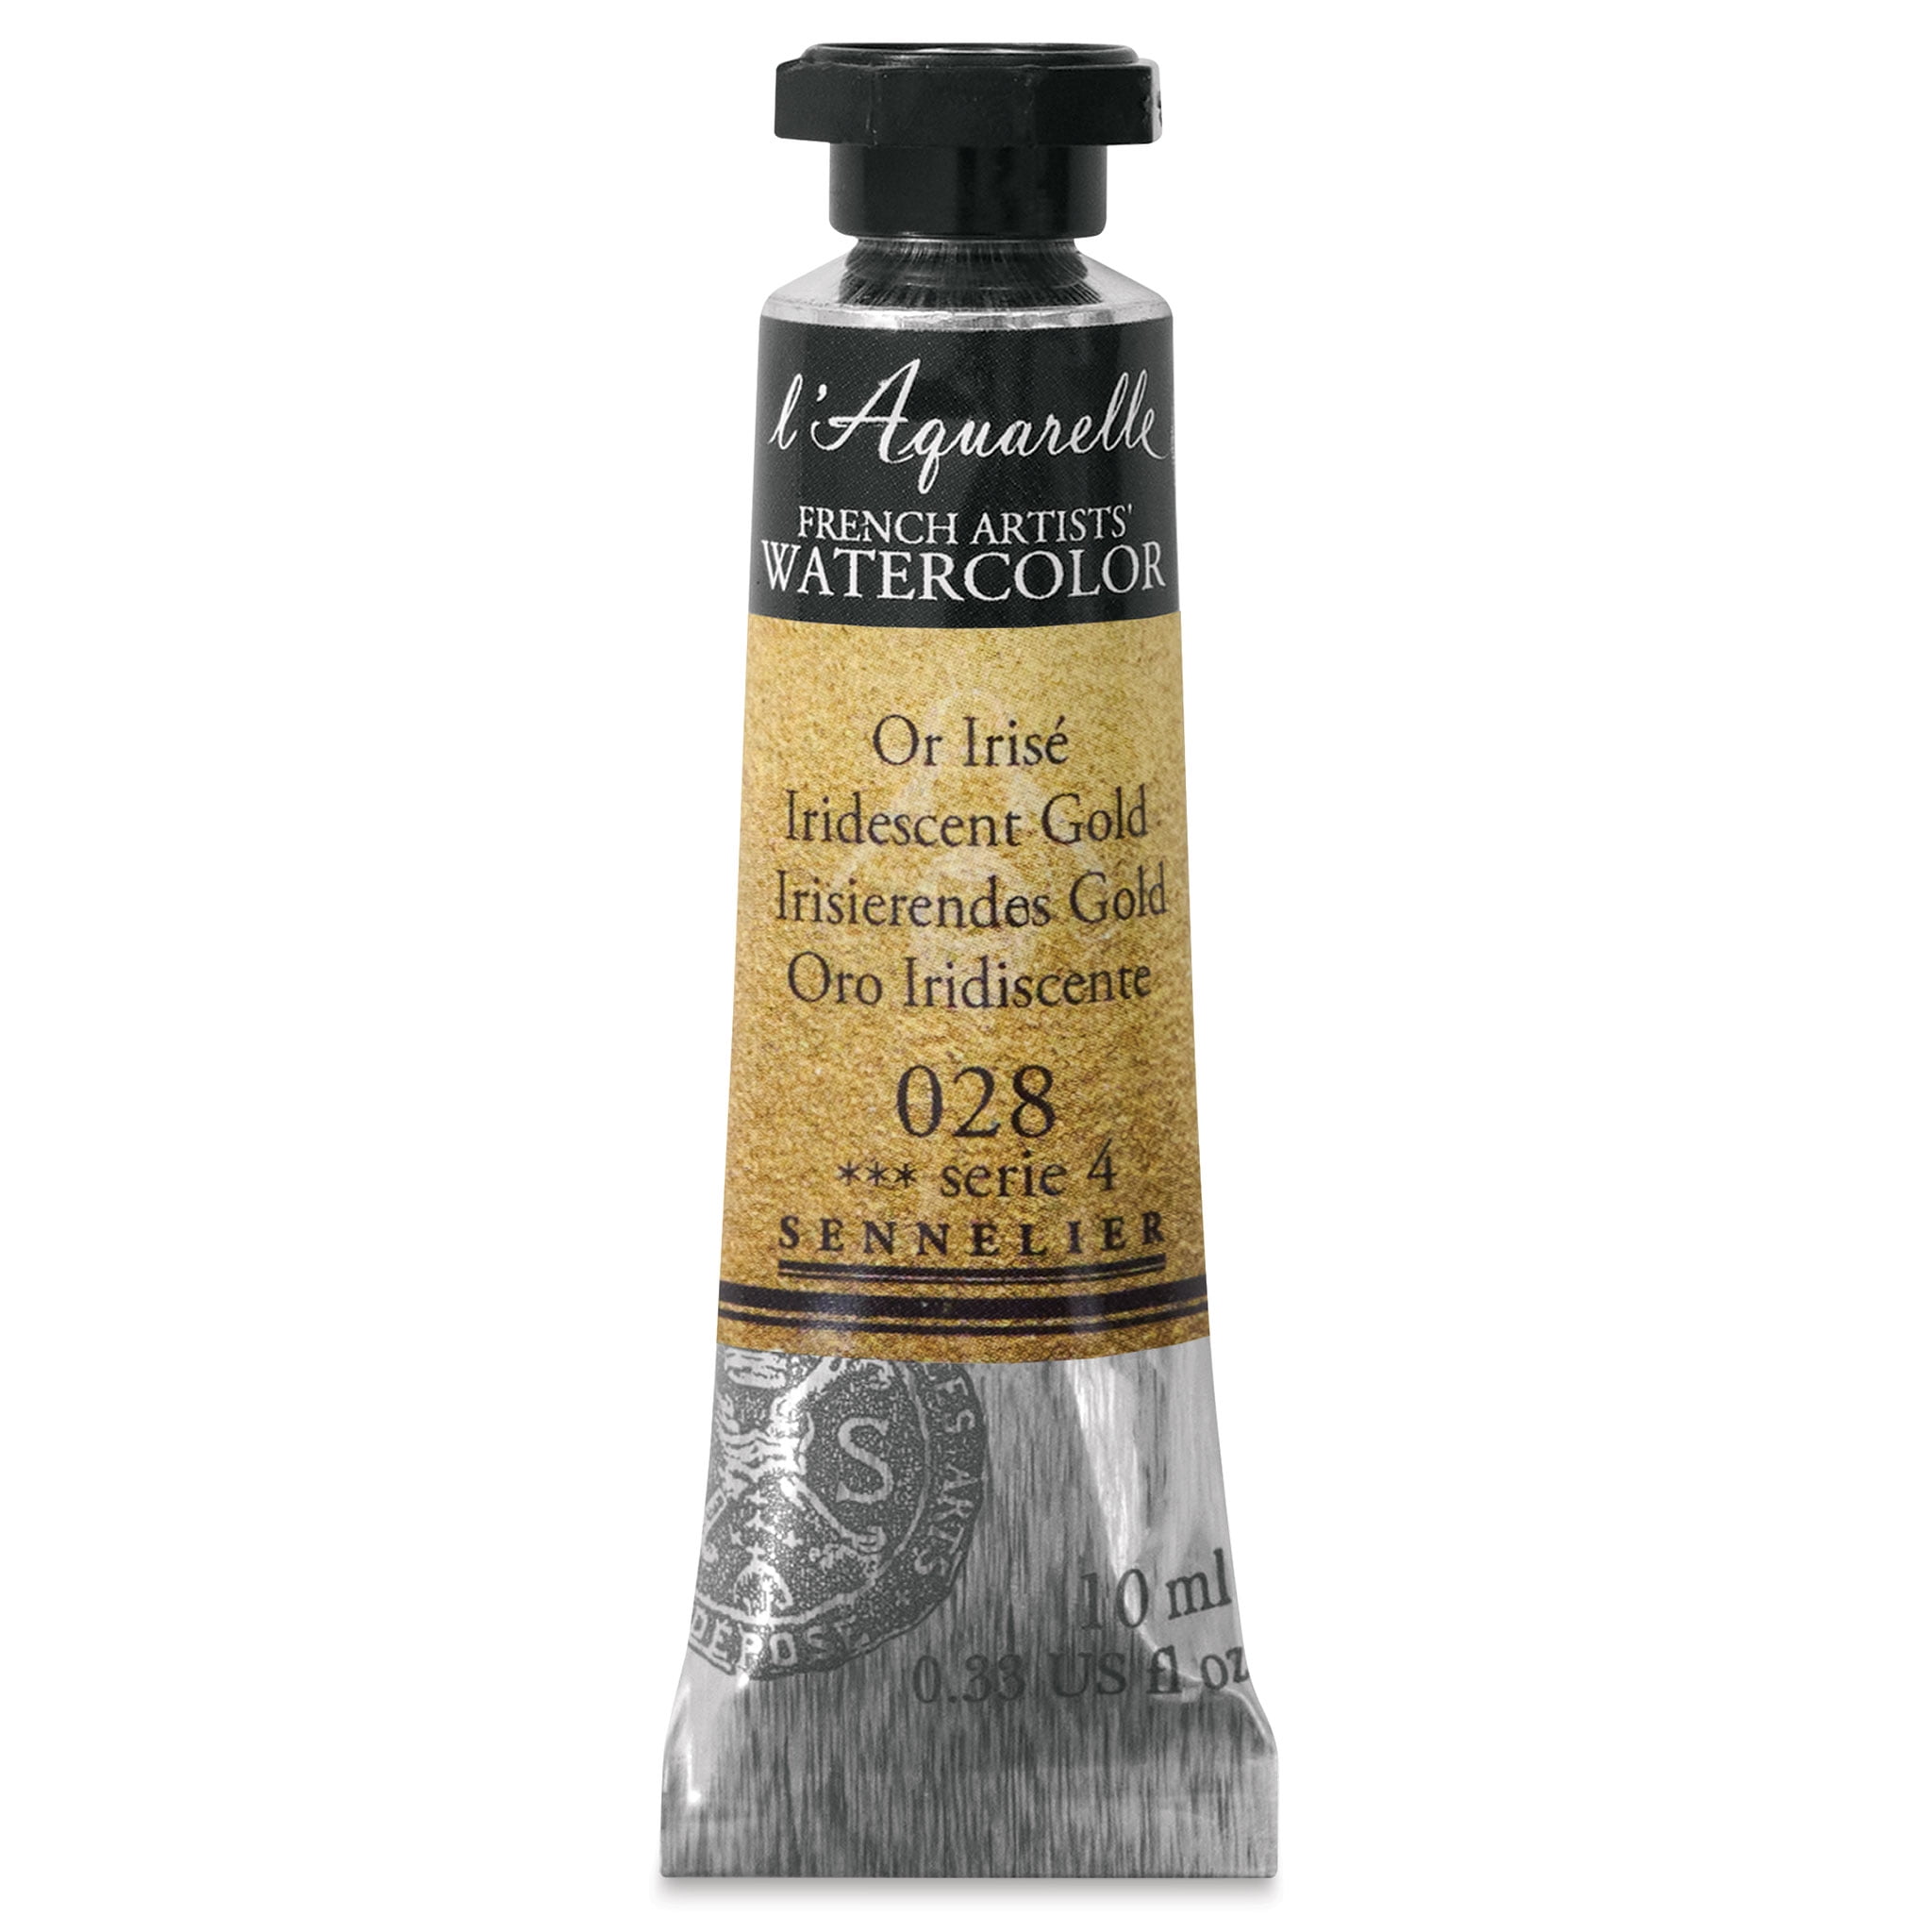 Sennelier French Artists' Watercolor - Iridescent Gold, 10 ml Tube